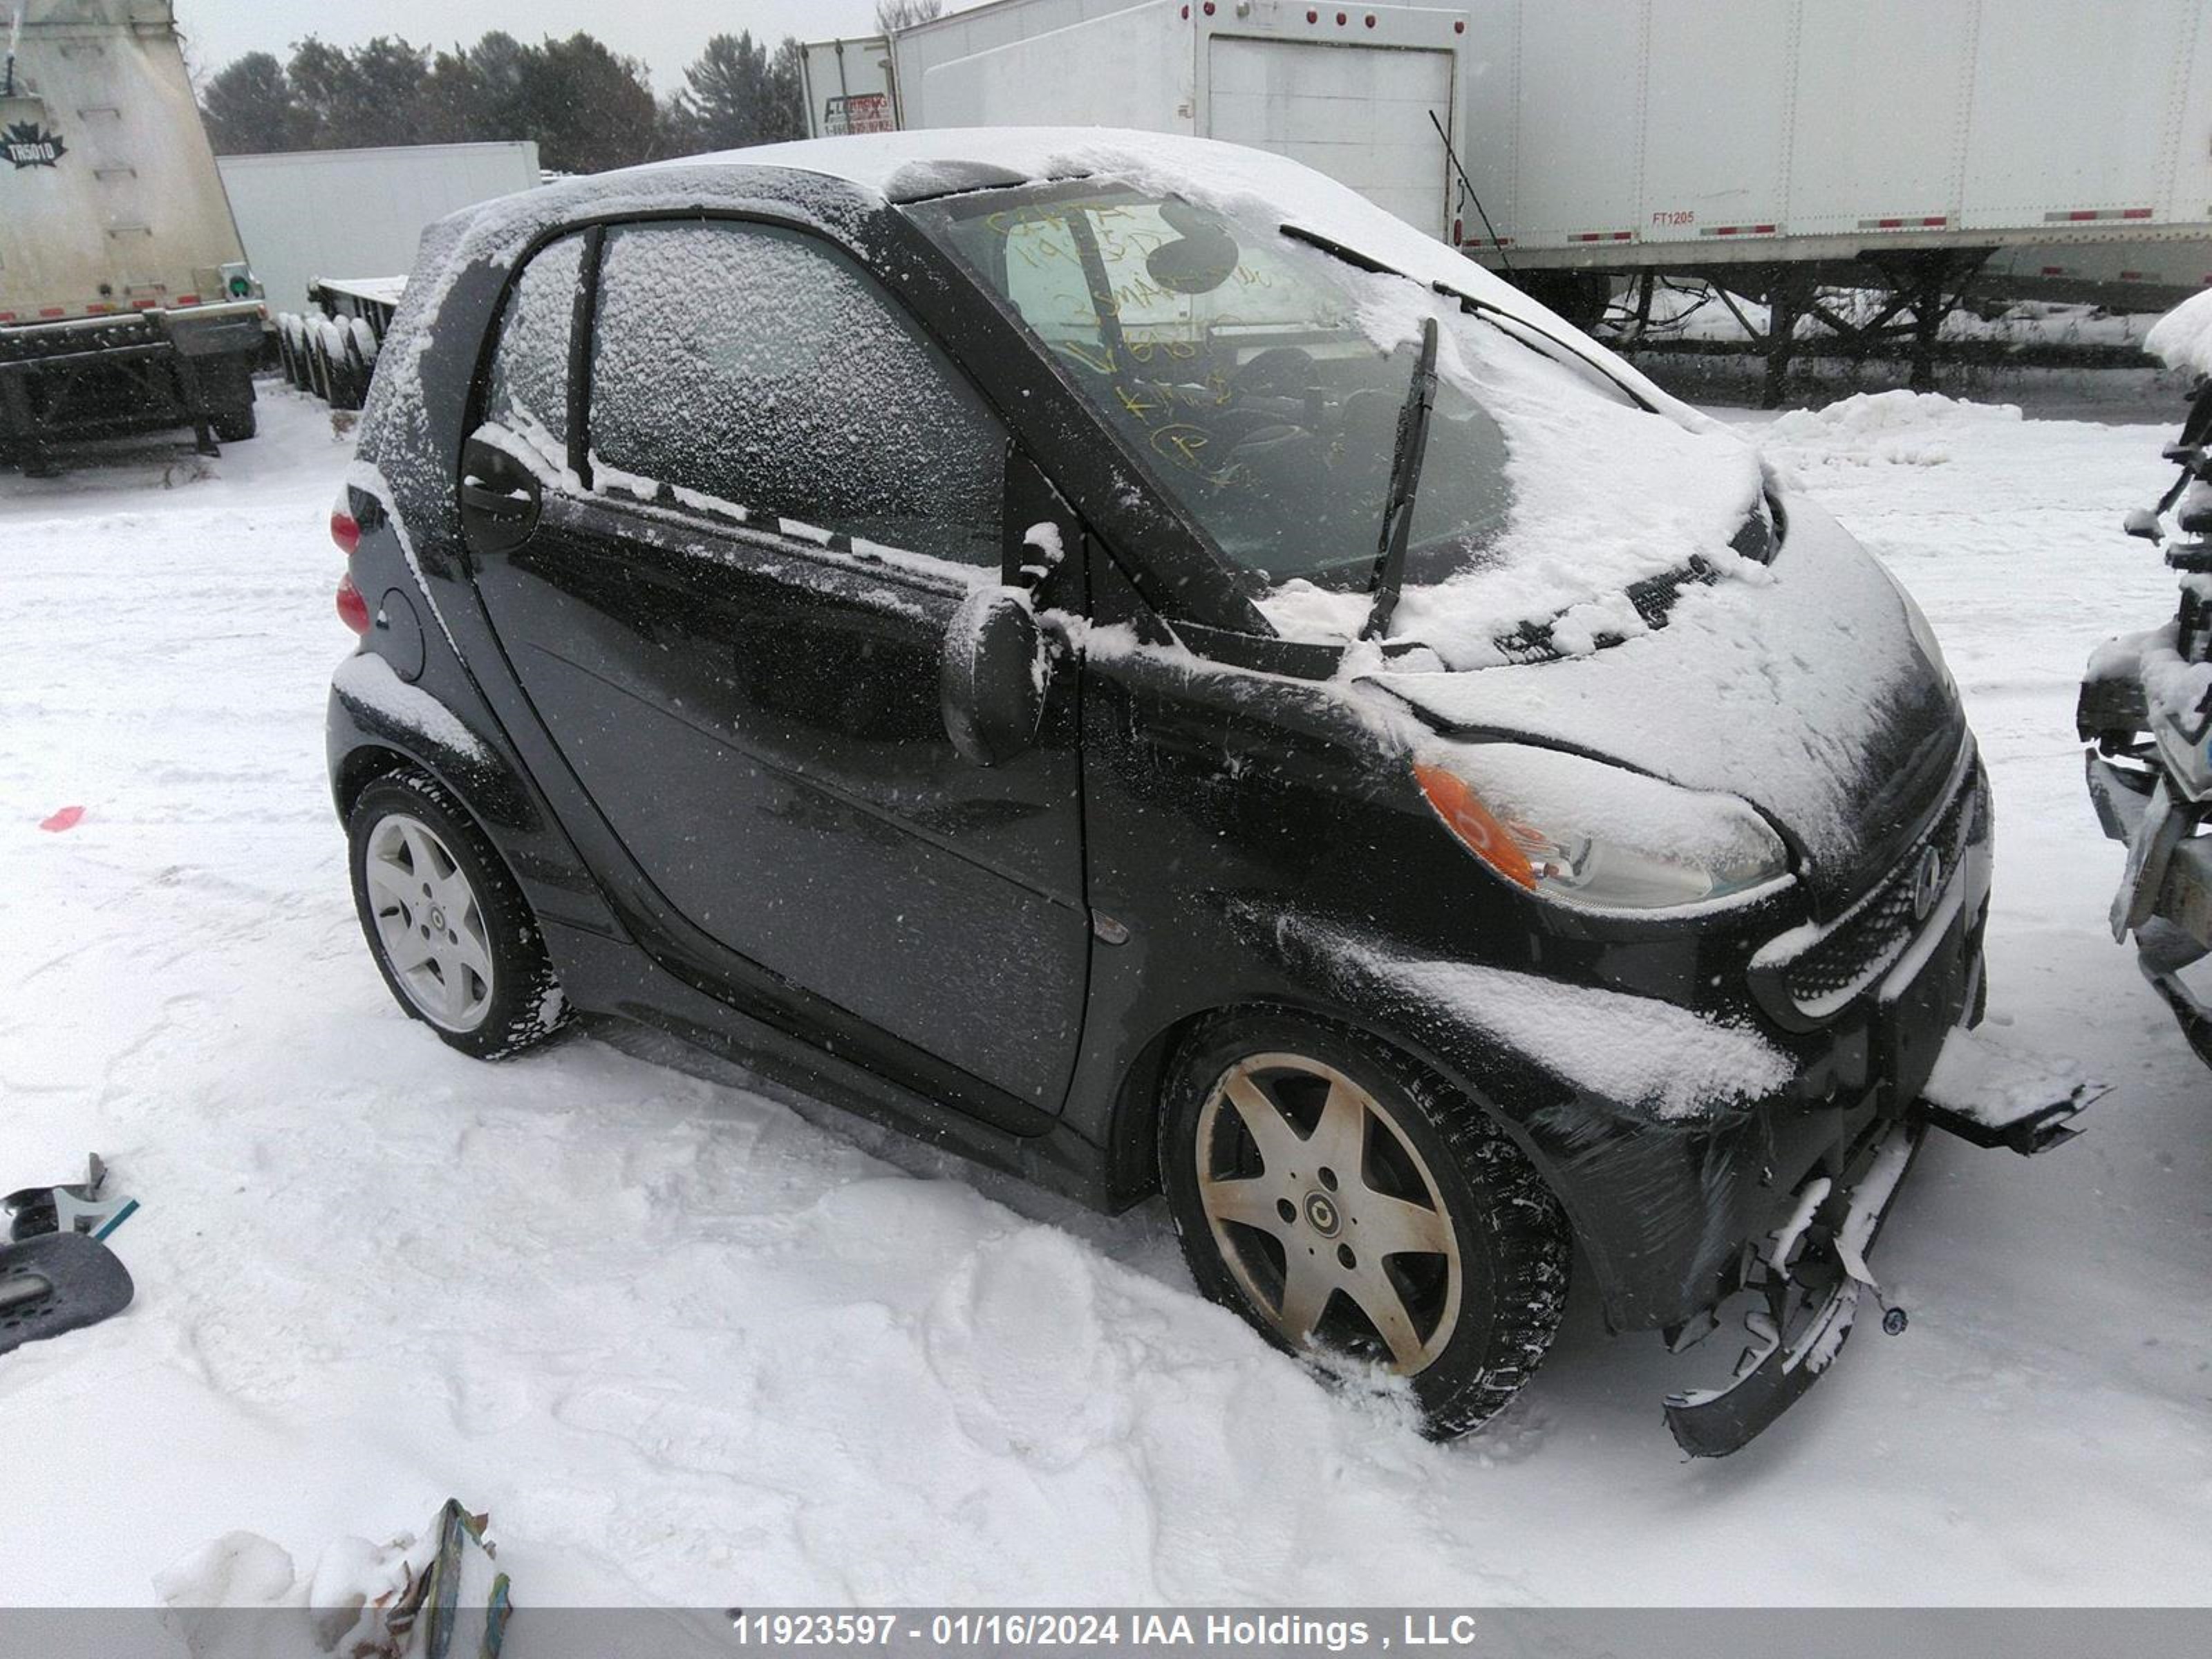 vin: WMEEJ3BAXDK698722 WMEEJ3BAXDK698722 2013 smart fortwo 1000 for Sale in l4a7x4, 16505 Hwy 48 , Stouffville, Ontario, USA